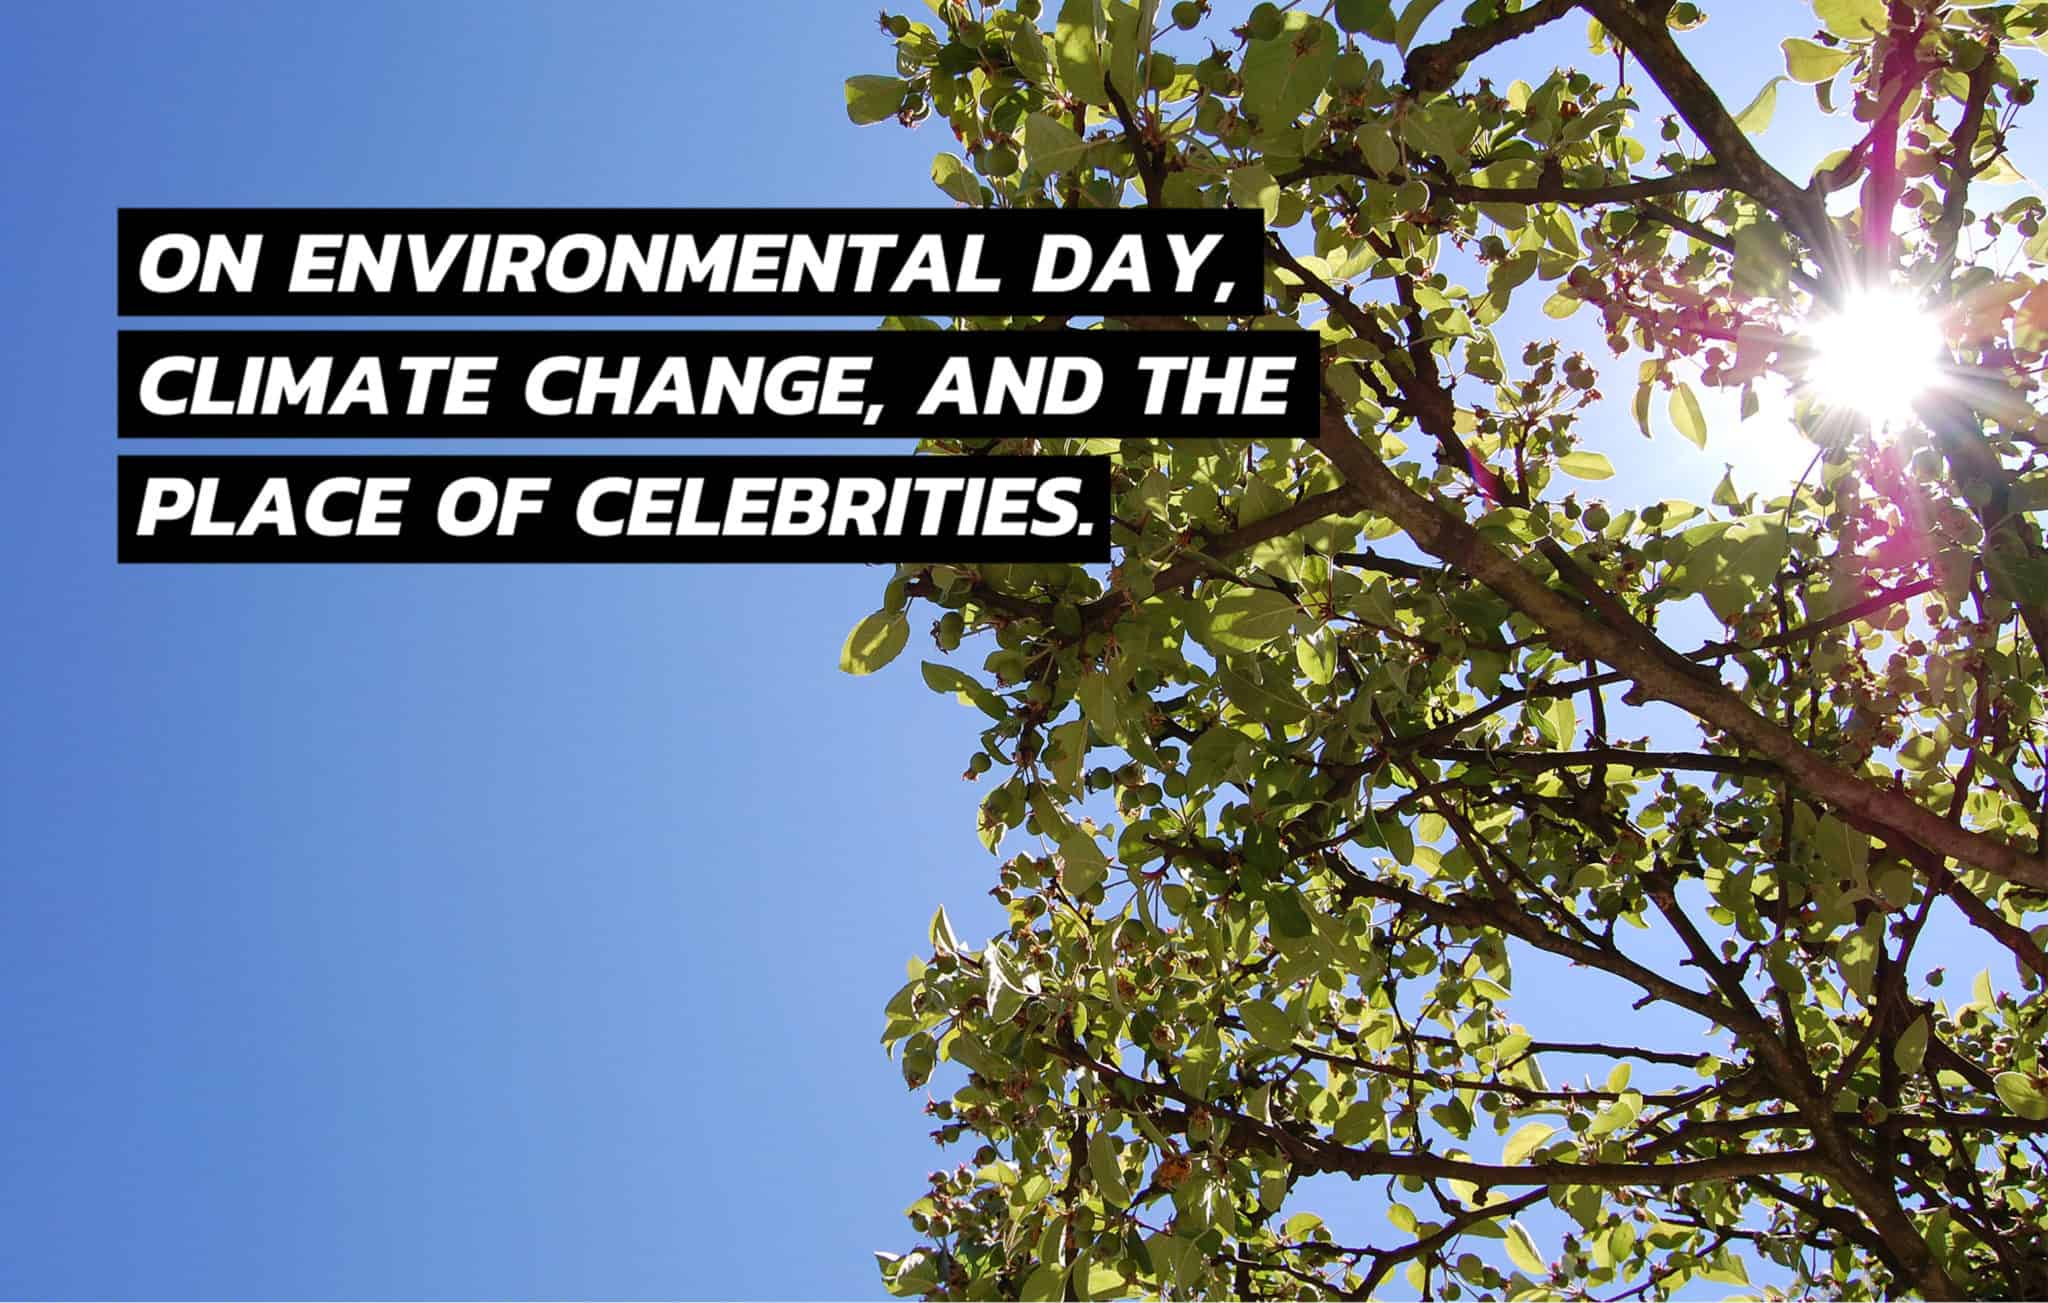 On Environmental Day, Climate Change, and the place of Celebrities